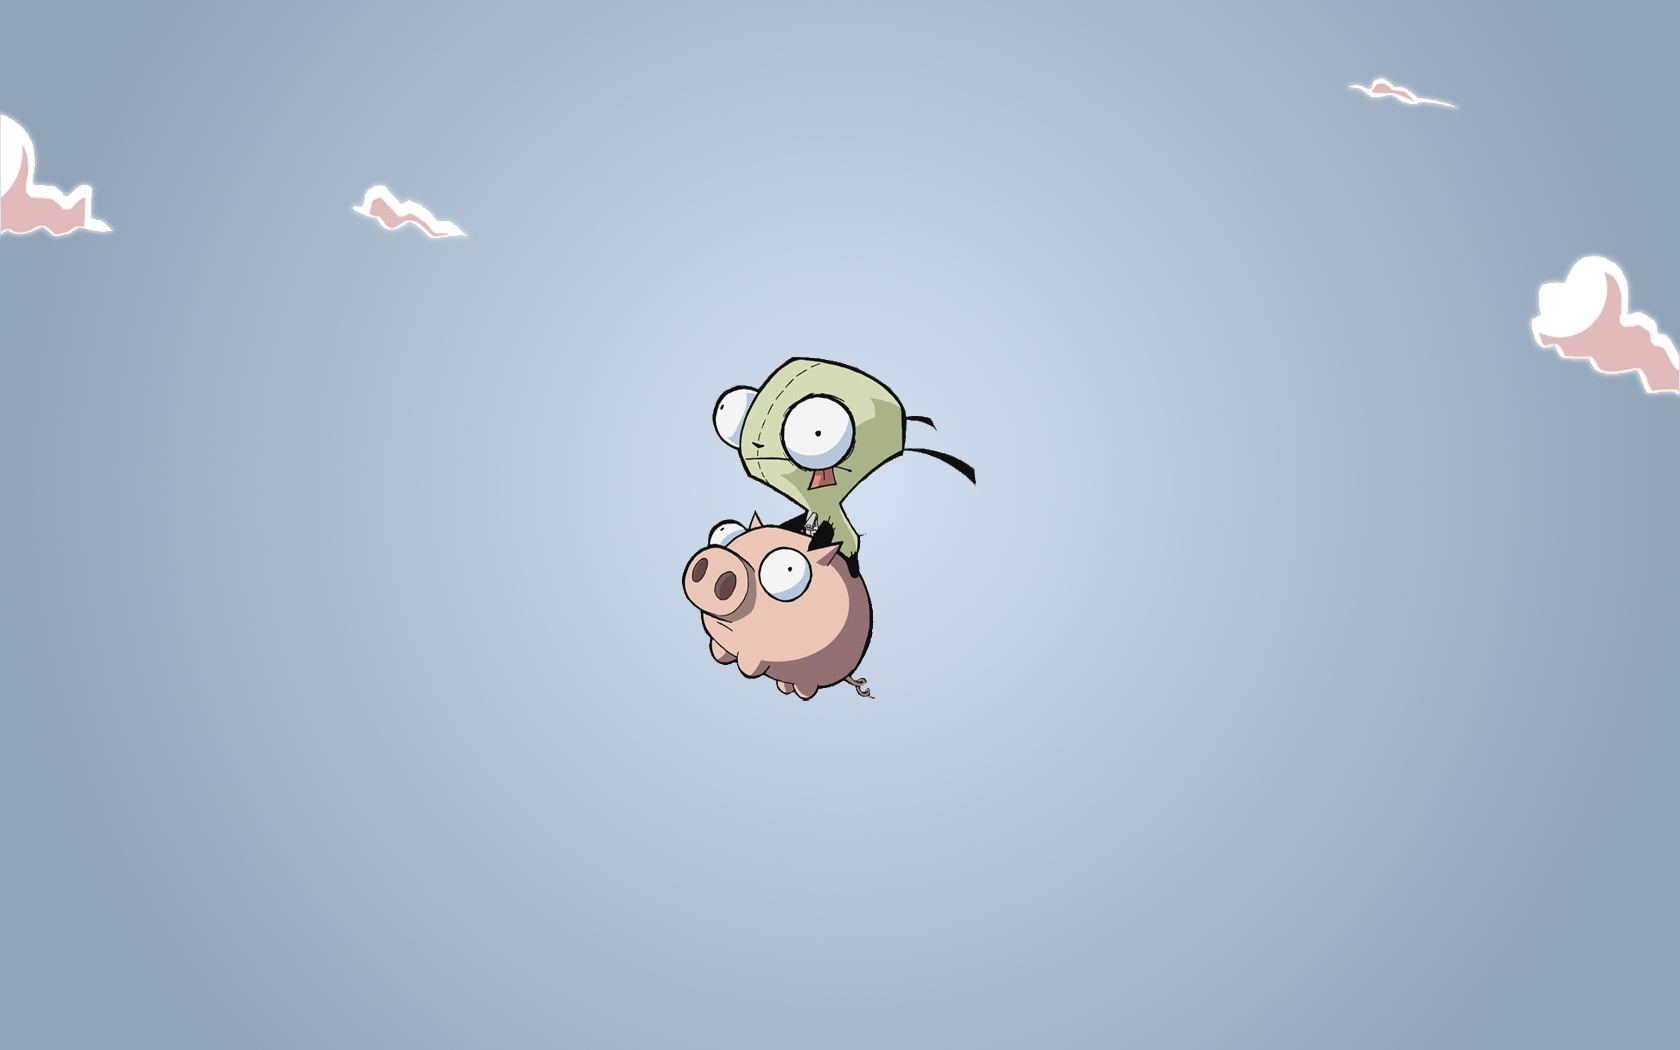 Ride the Pig - 1680x1050